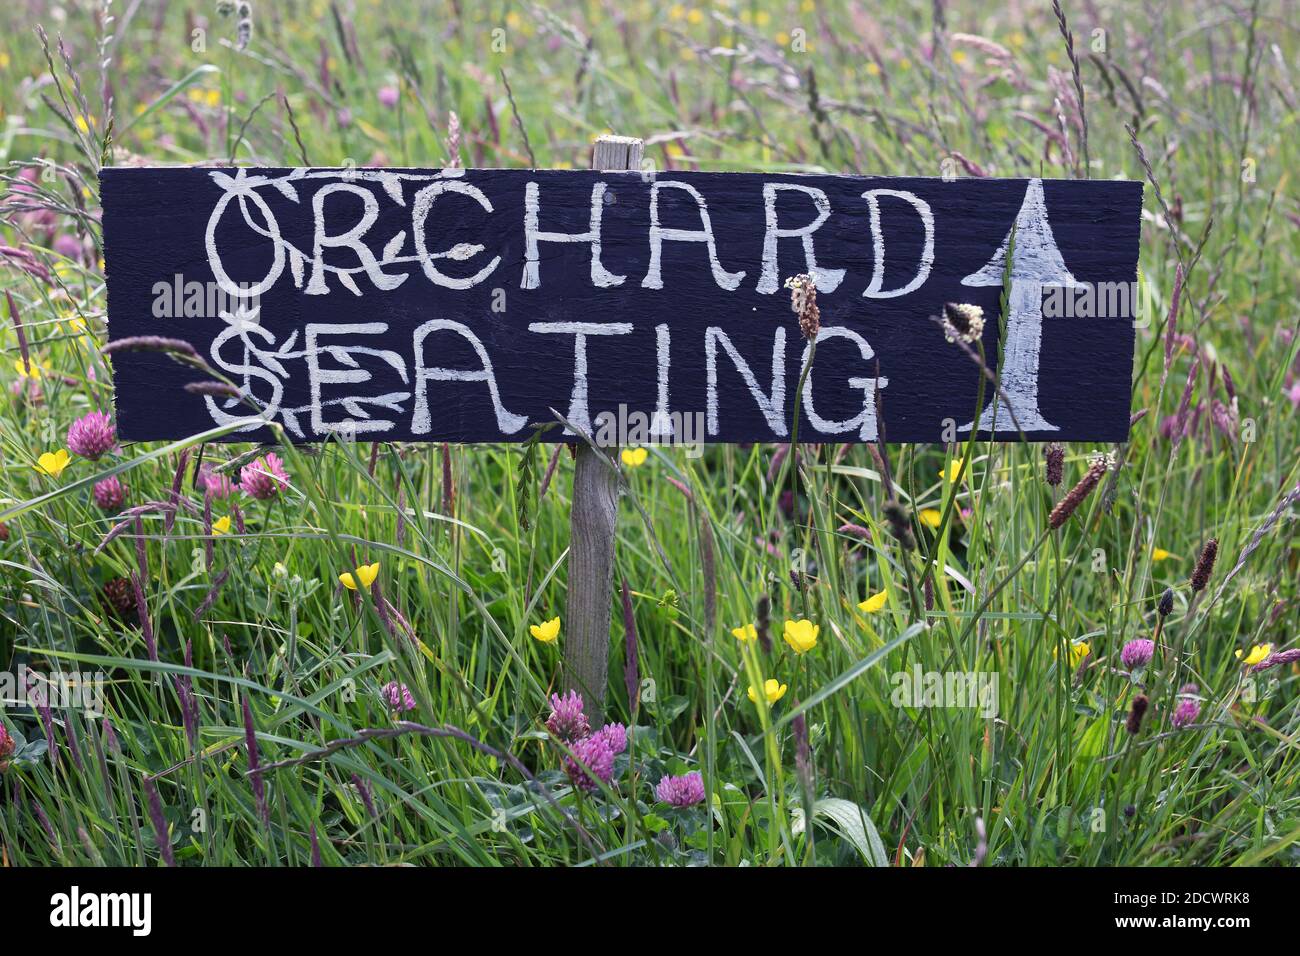 Community Orchard in Yeoman Way, Newquay . Stock Photo